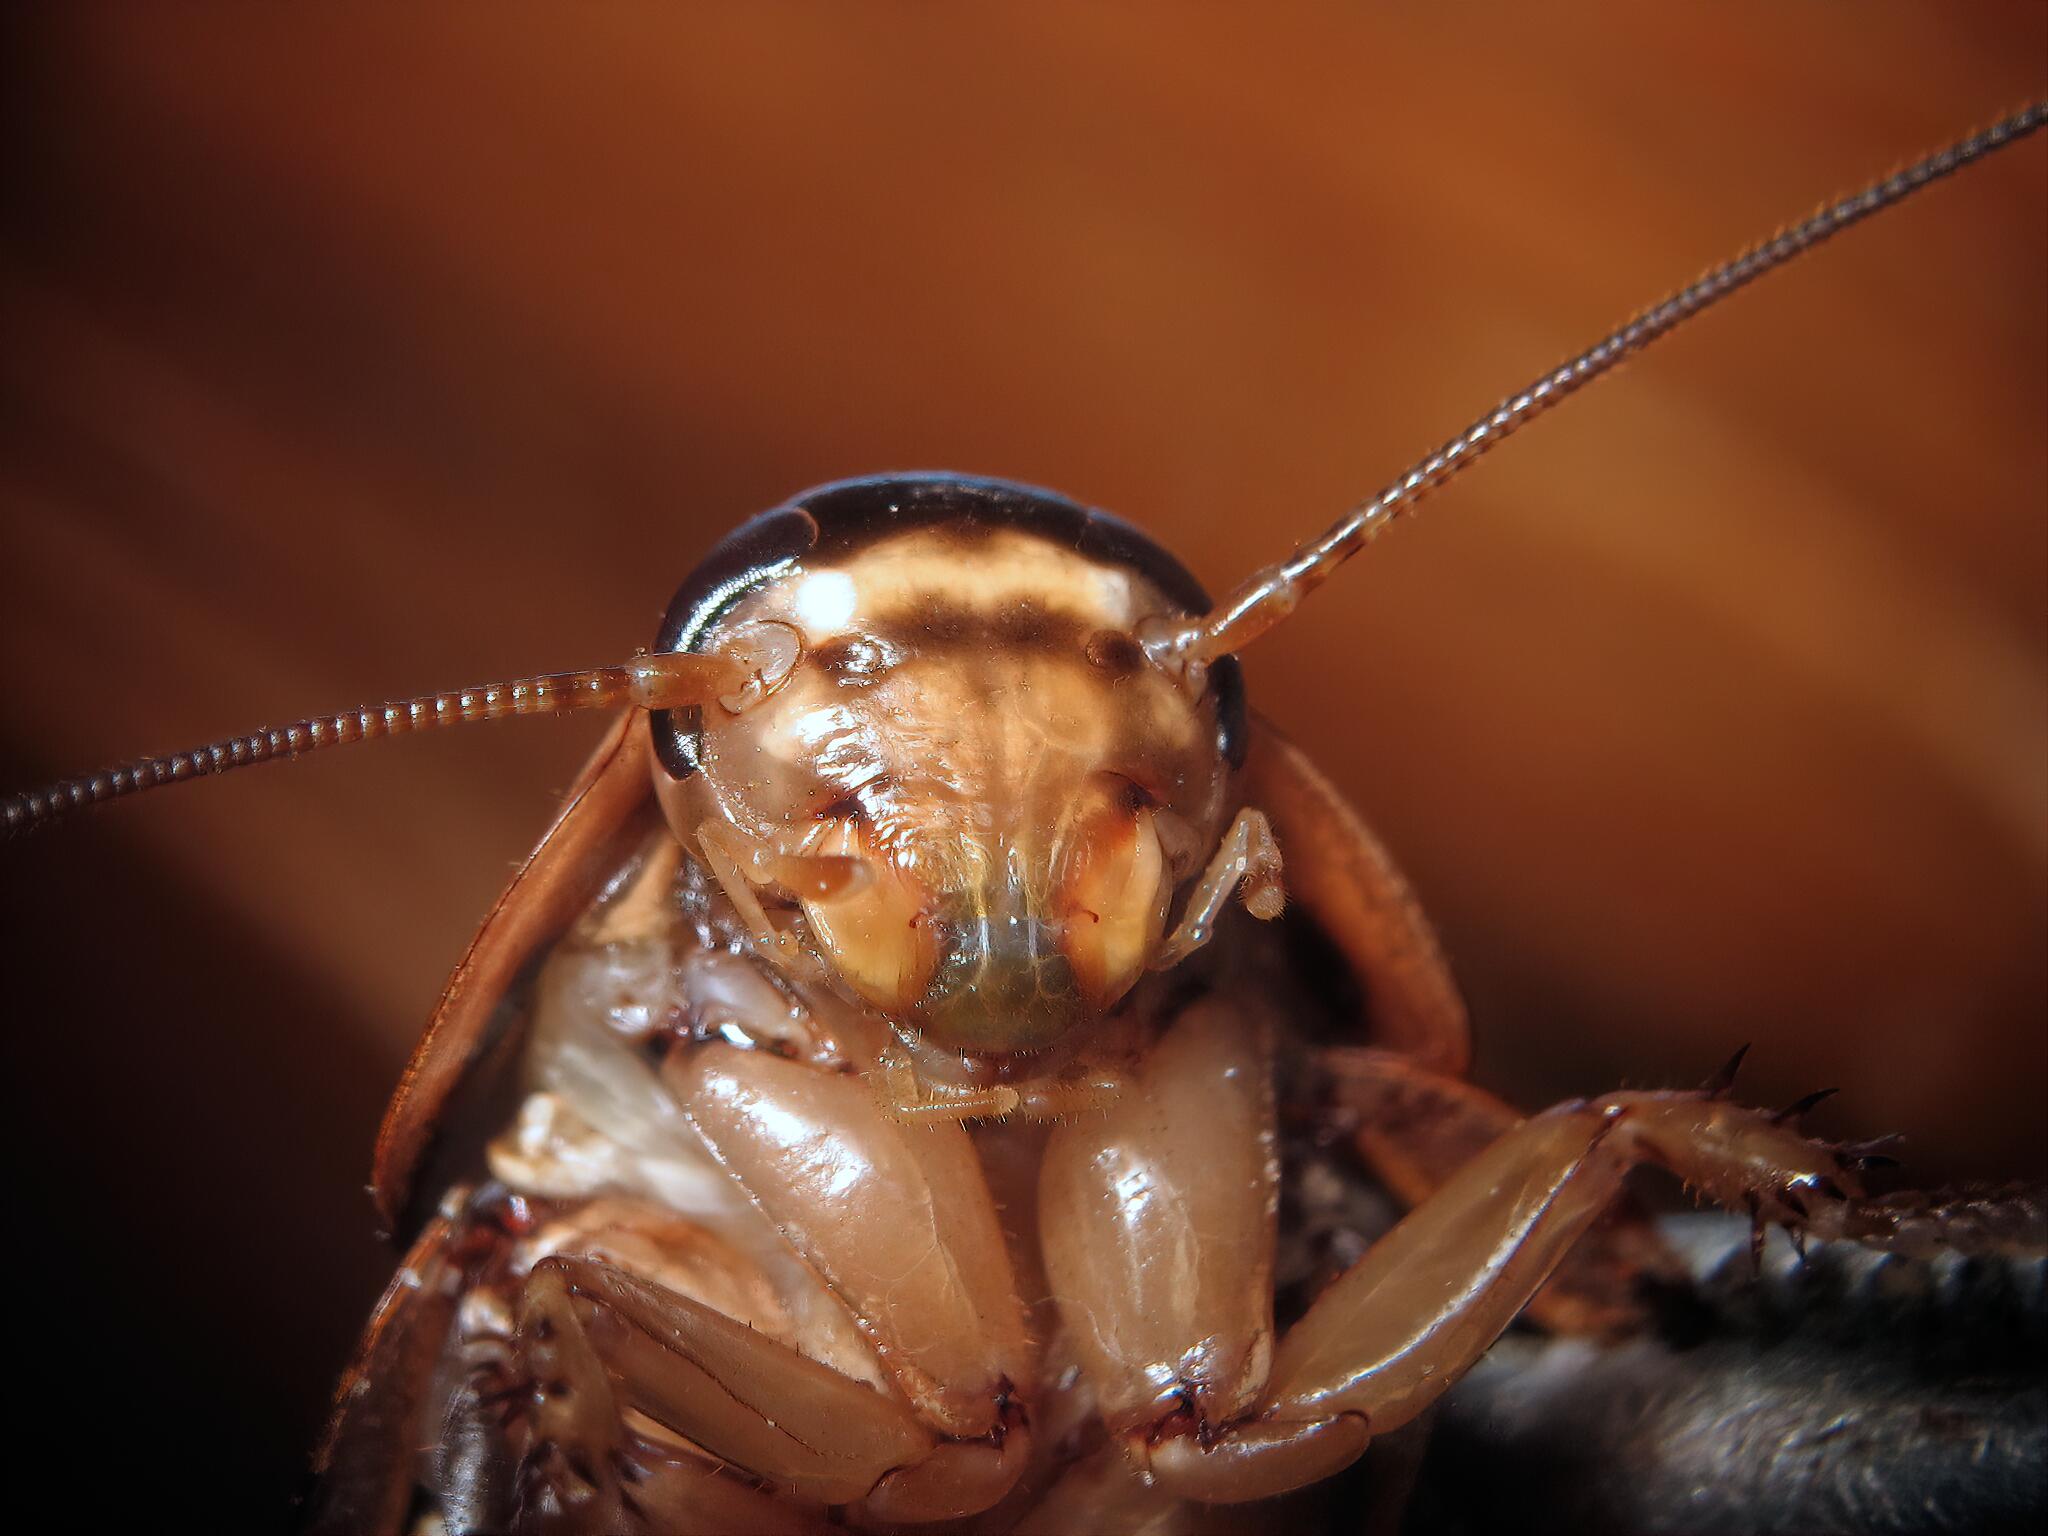 Name a Cockroach After Your Ex, Watch an Animal Eat it On Valentine's Day - Thumbnail Image